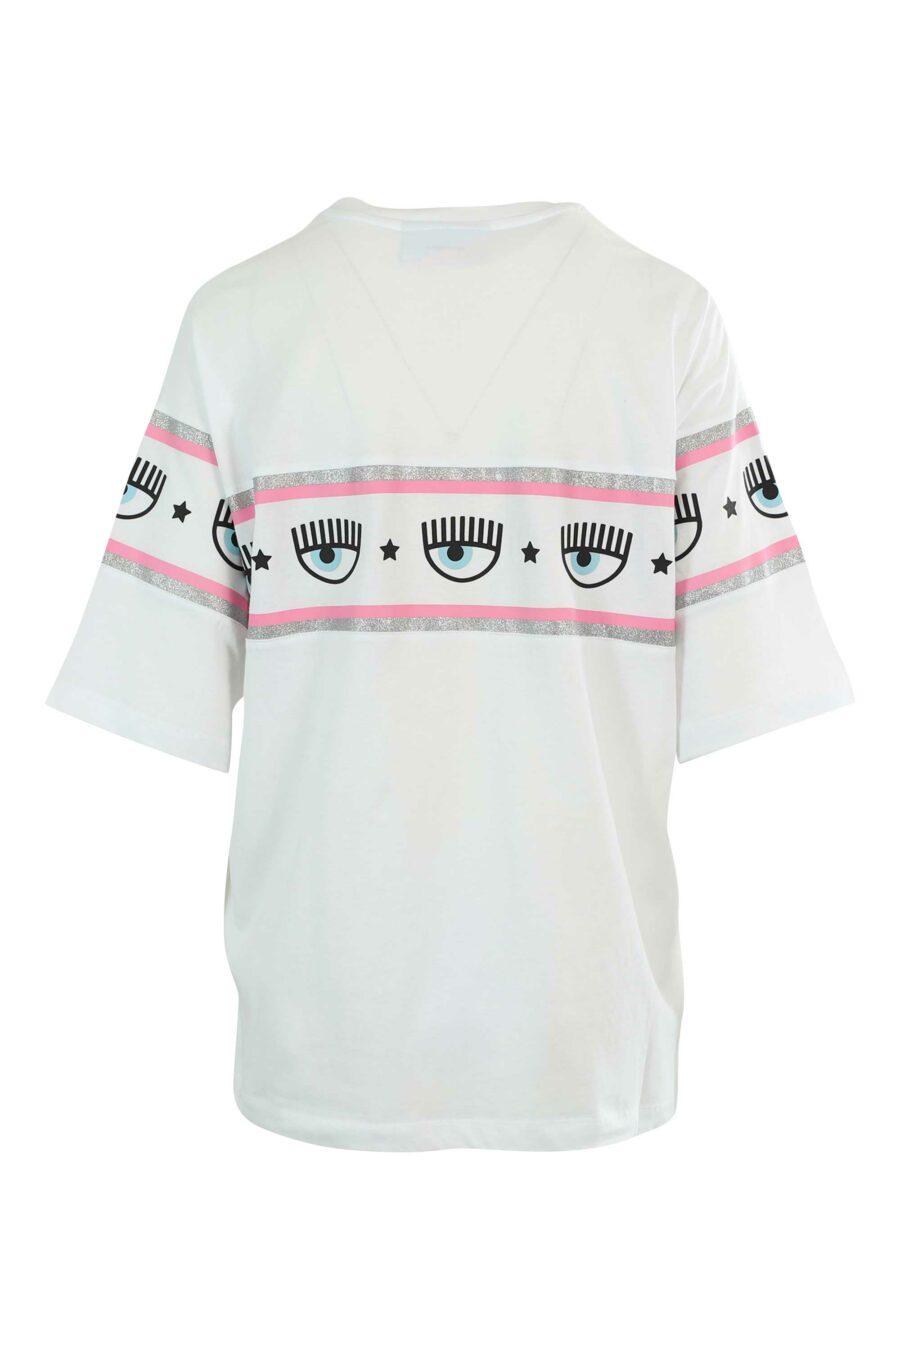 White wide sleeve T-shirt with eye logo on ribbon - 8052672419330 2